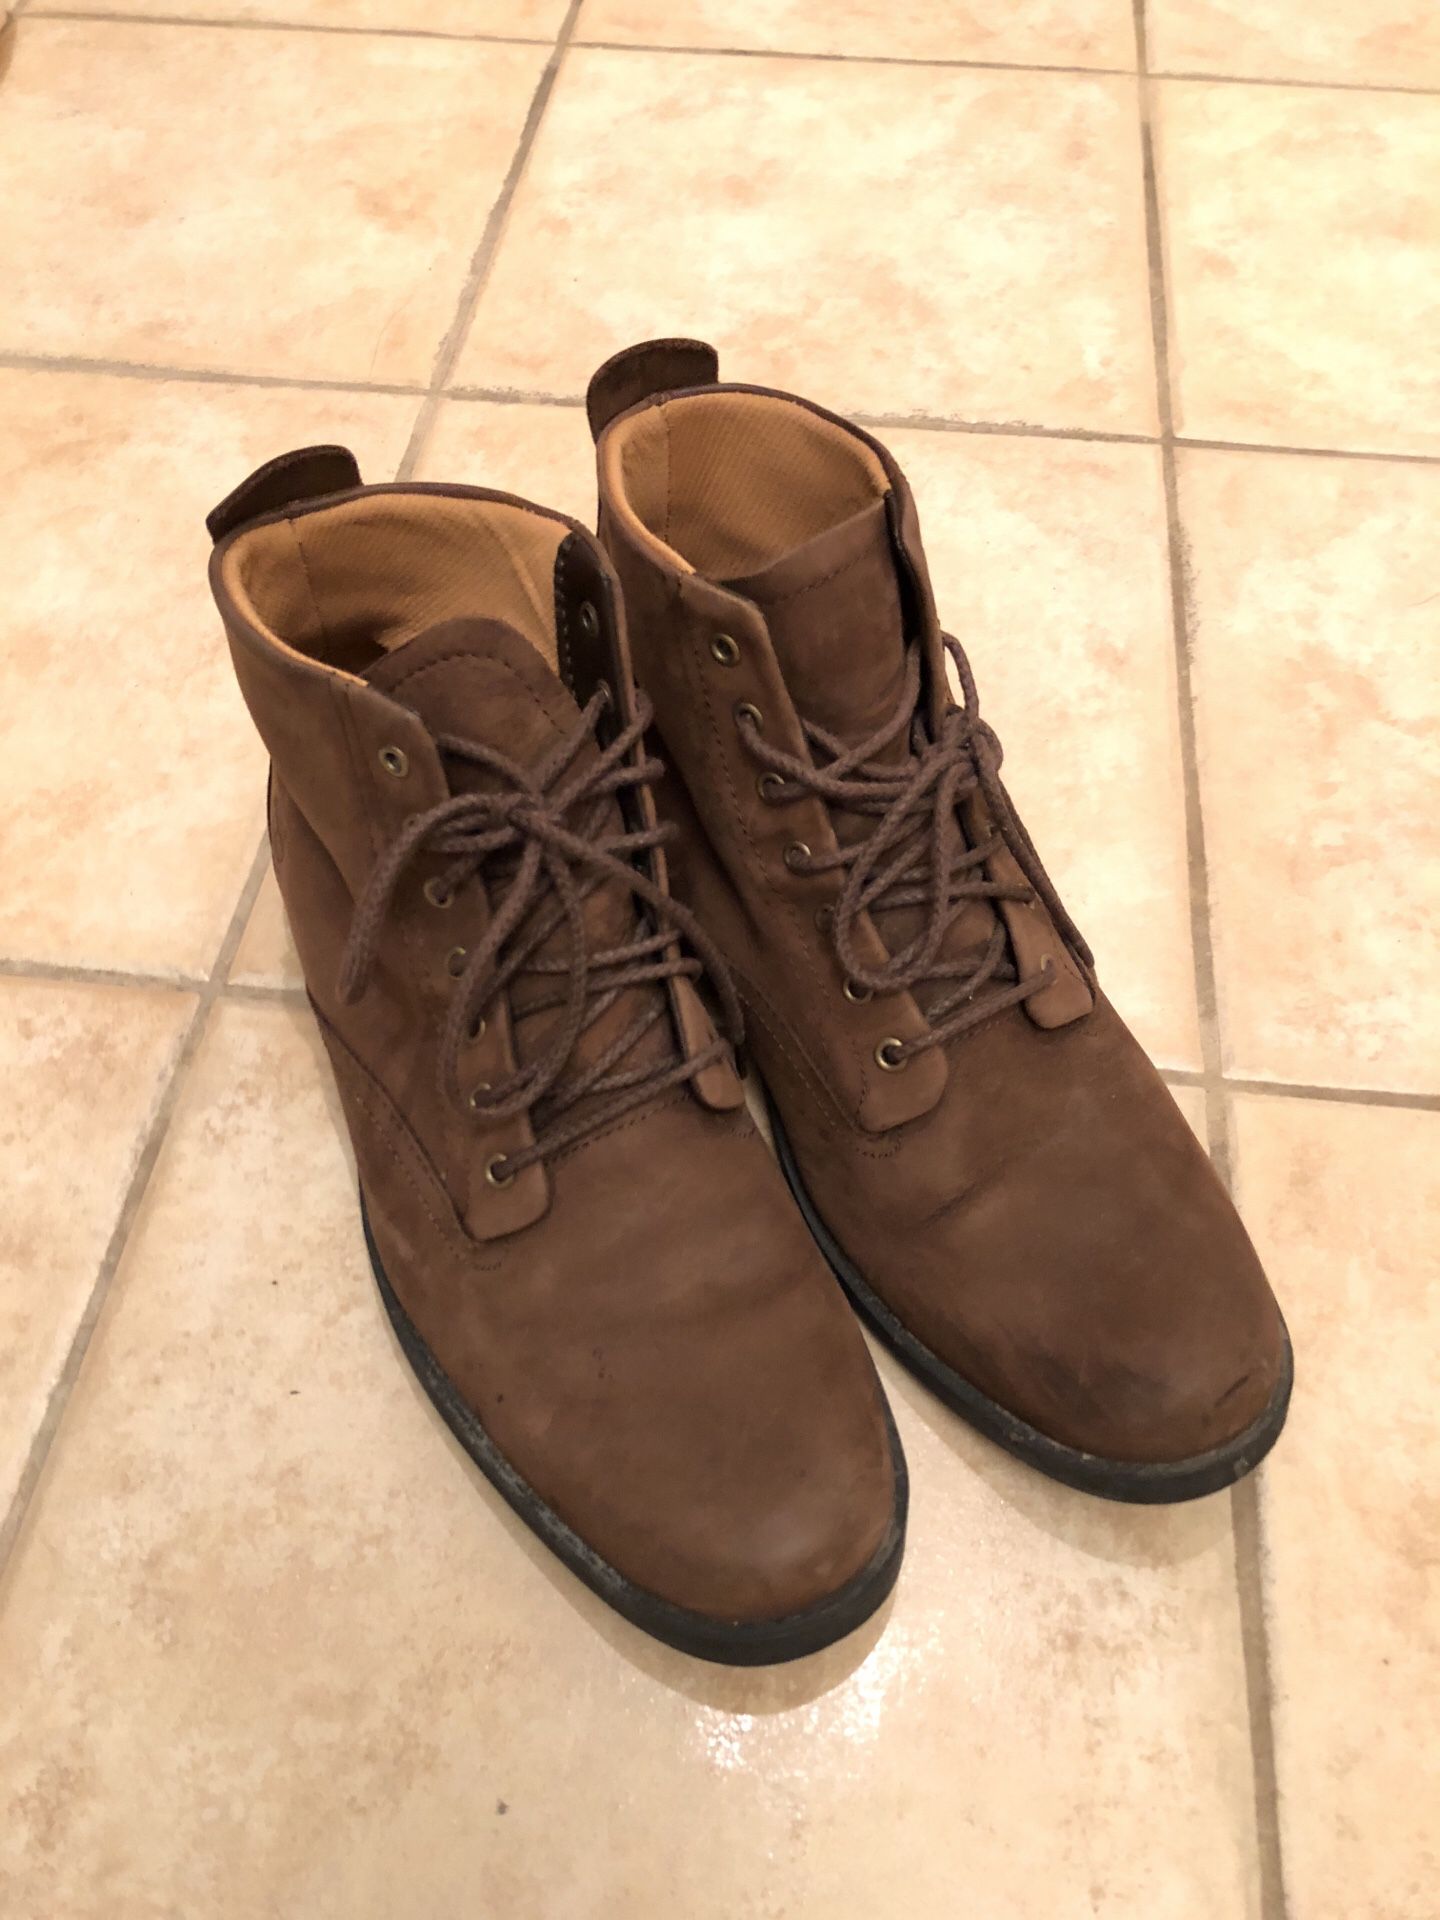 Timberland Earthkeepers Mens Boots size 8